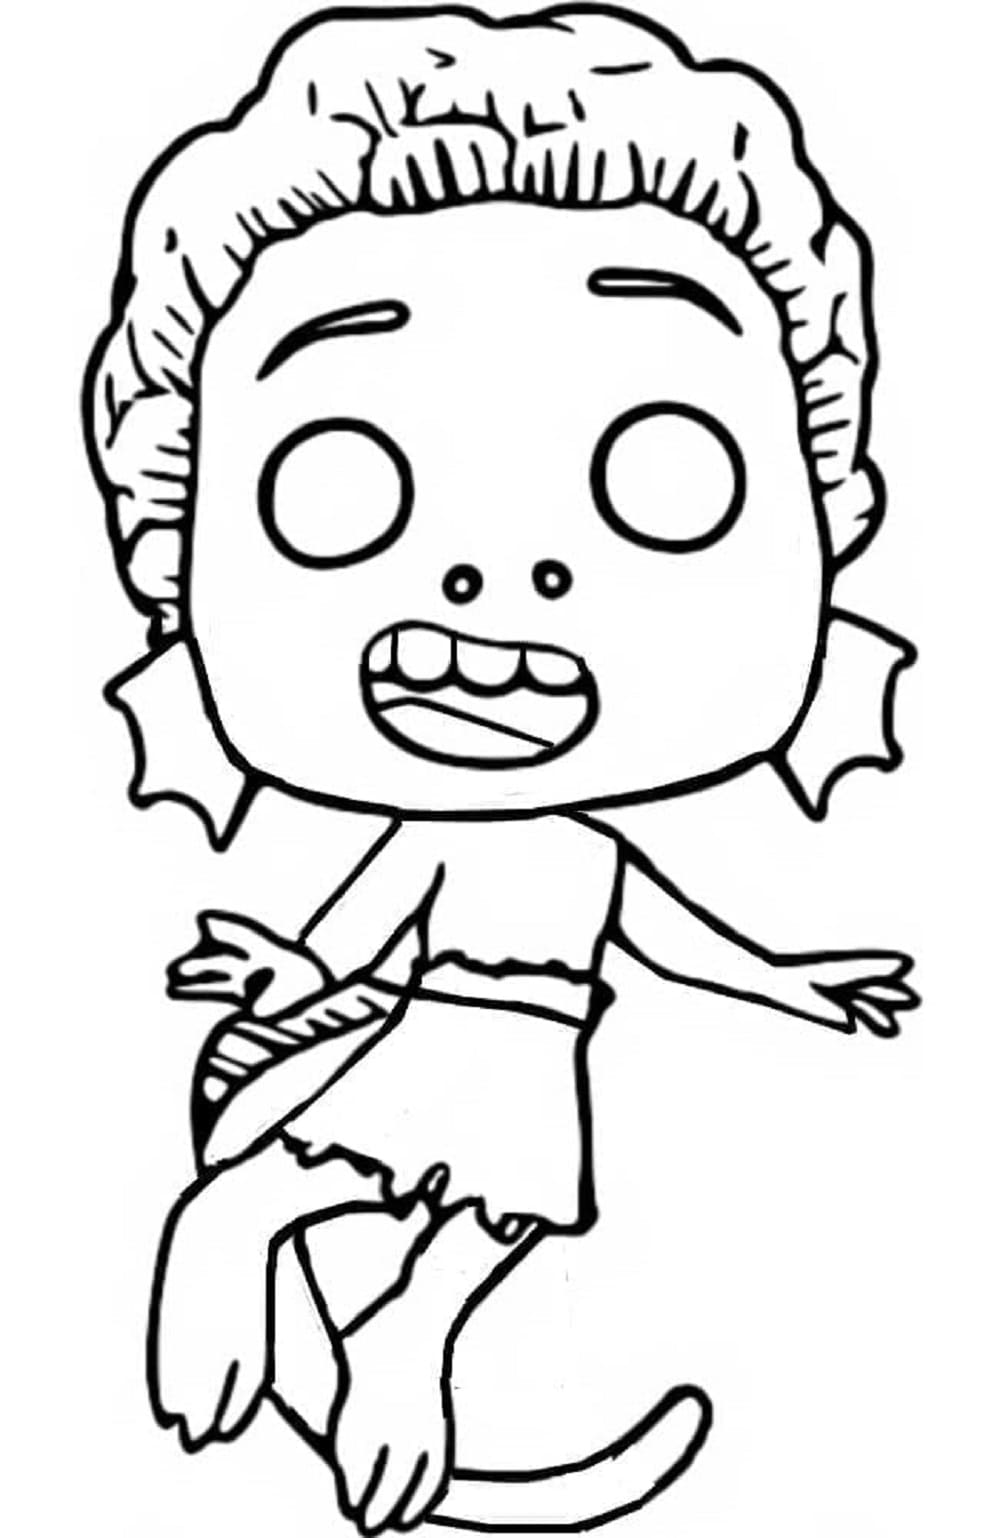 Printable Funko Pop Luca Coloring Page